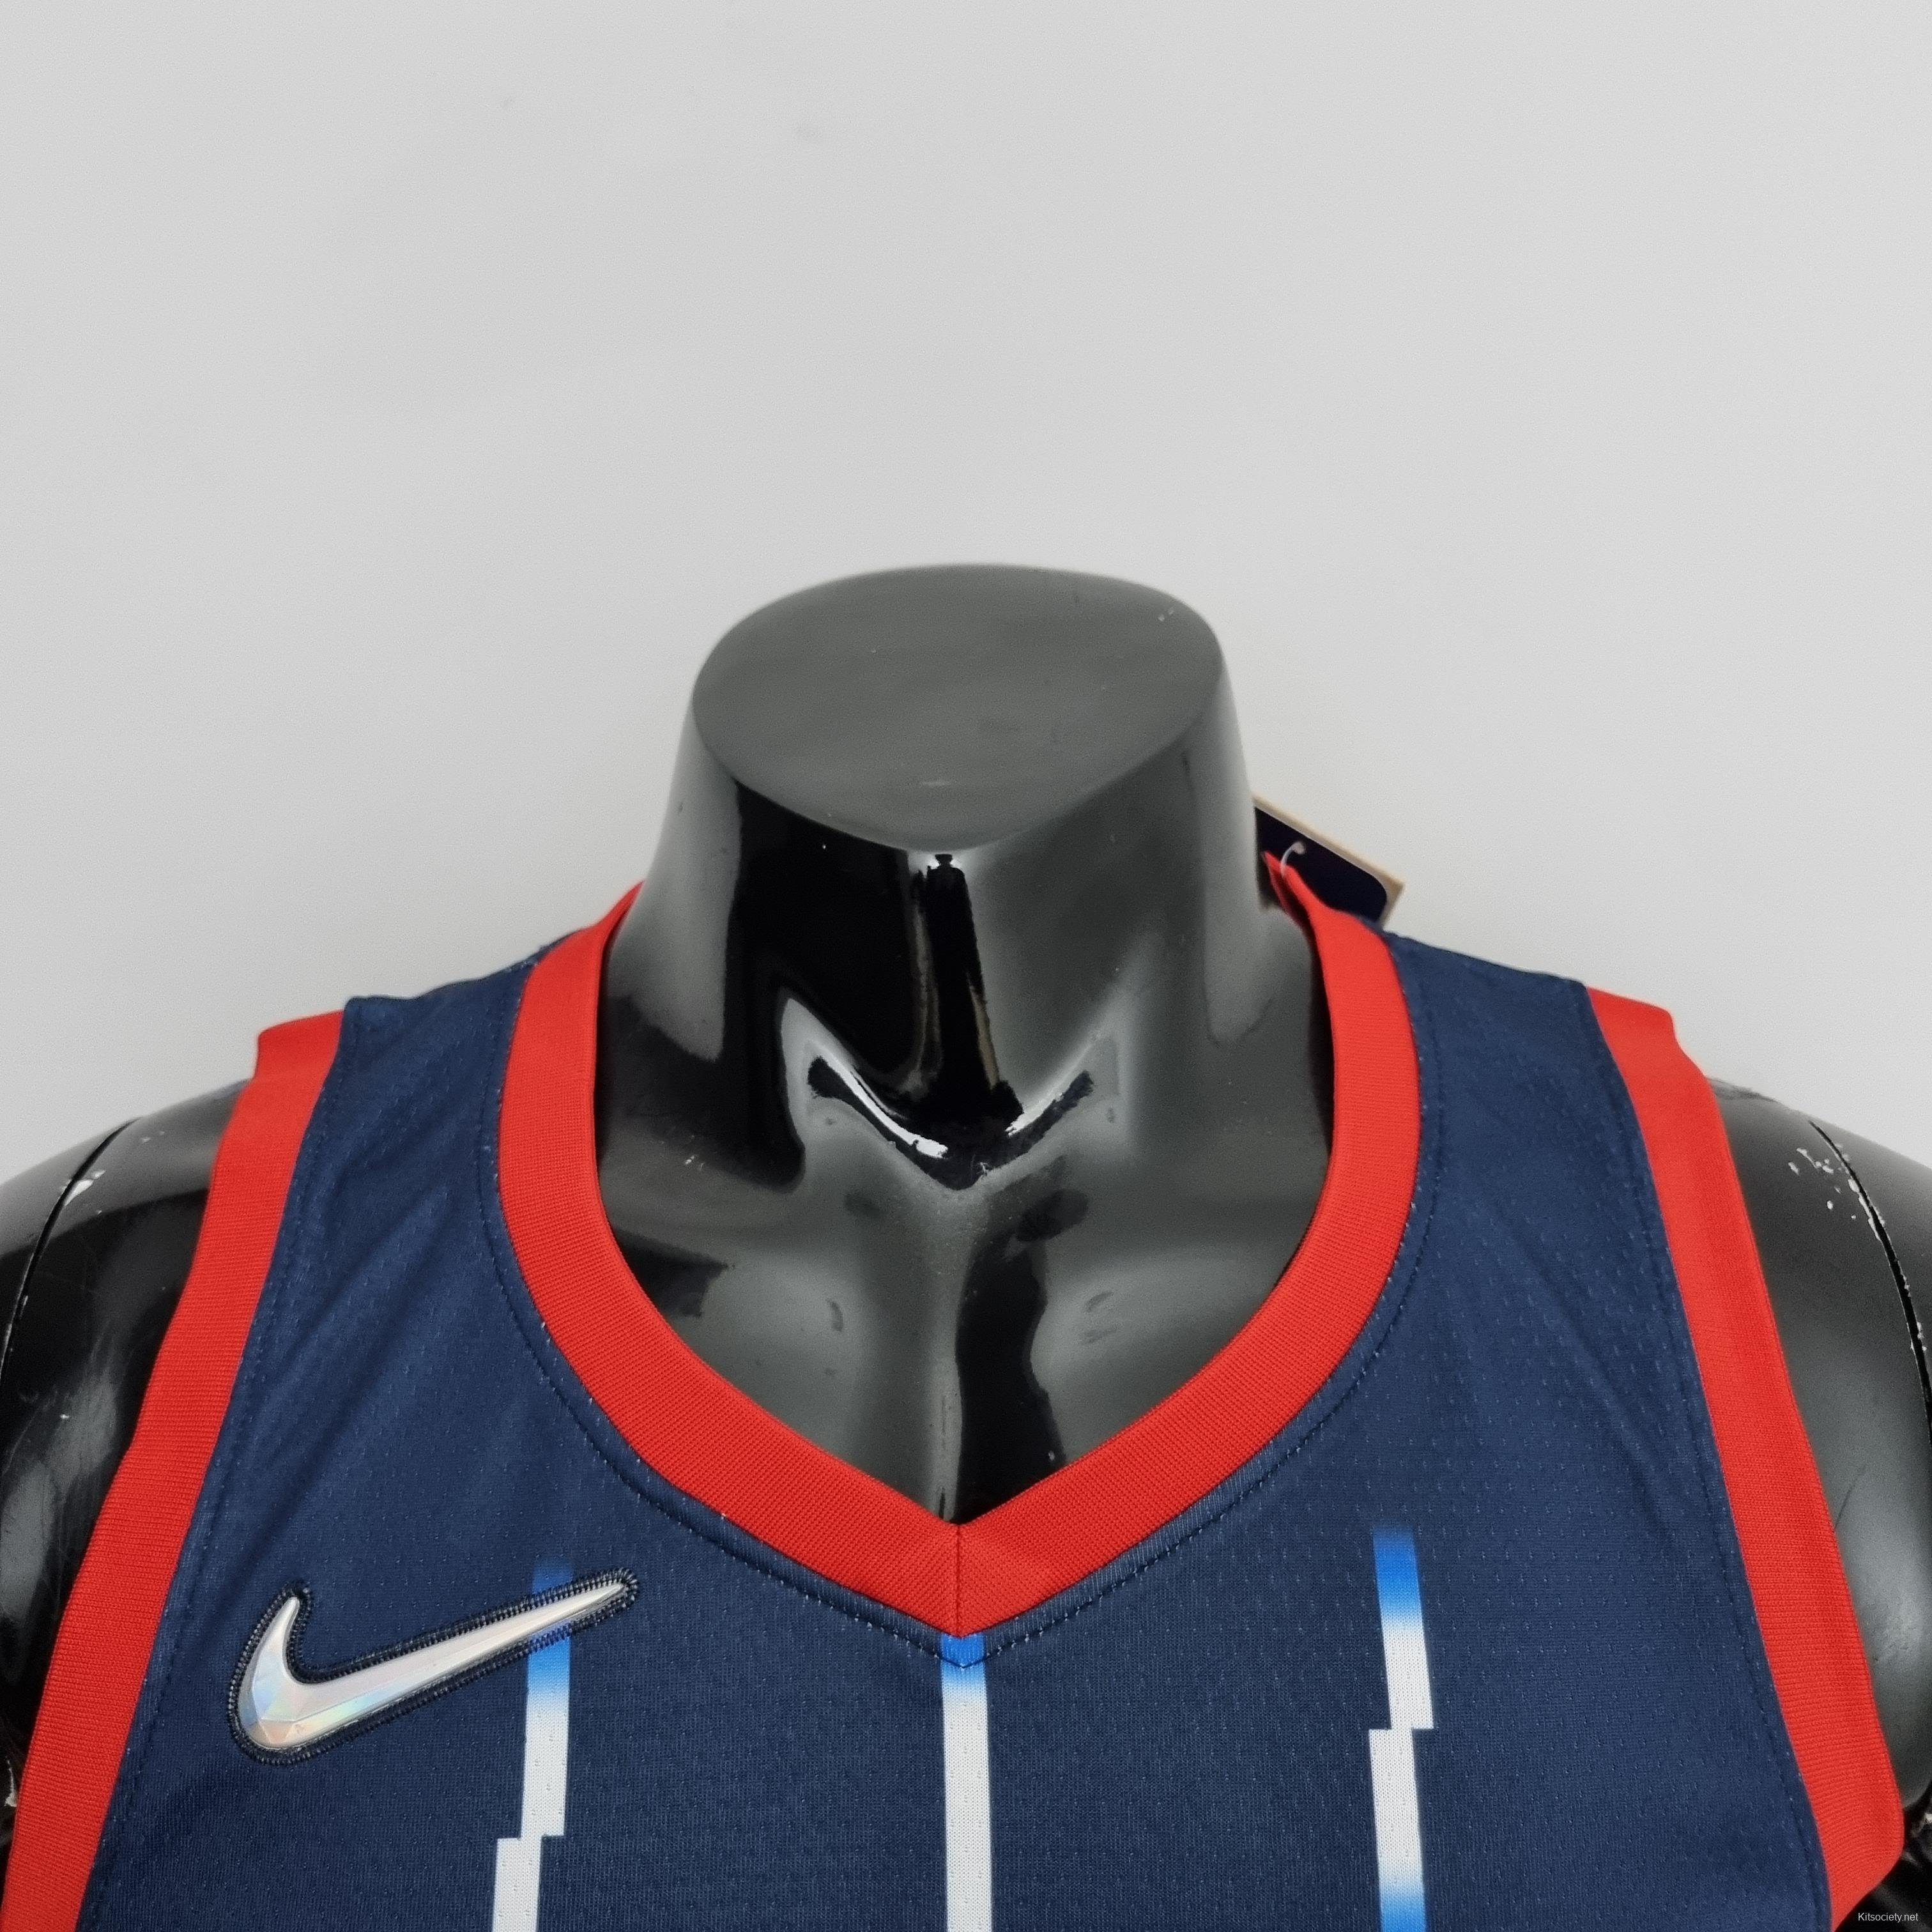 What does the Rockets' newest City Edition jersey look like? - The